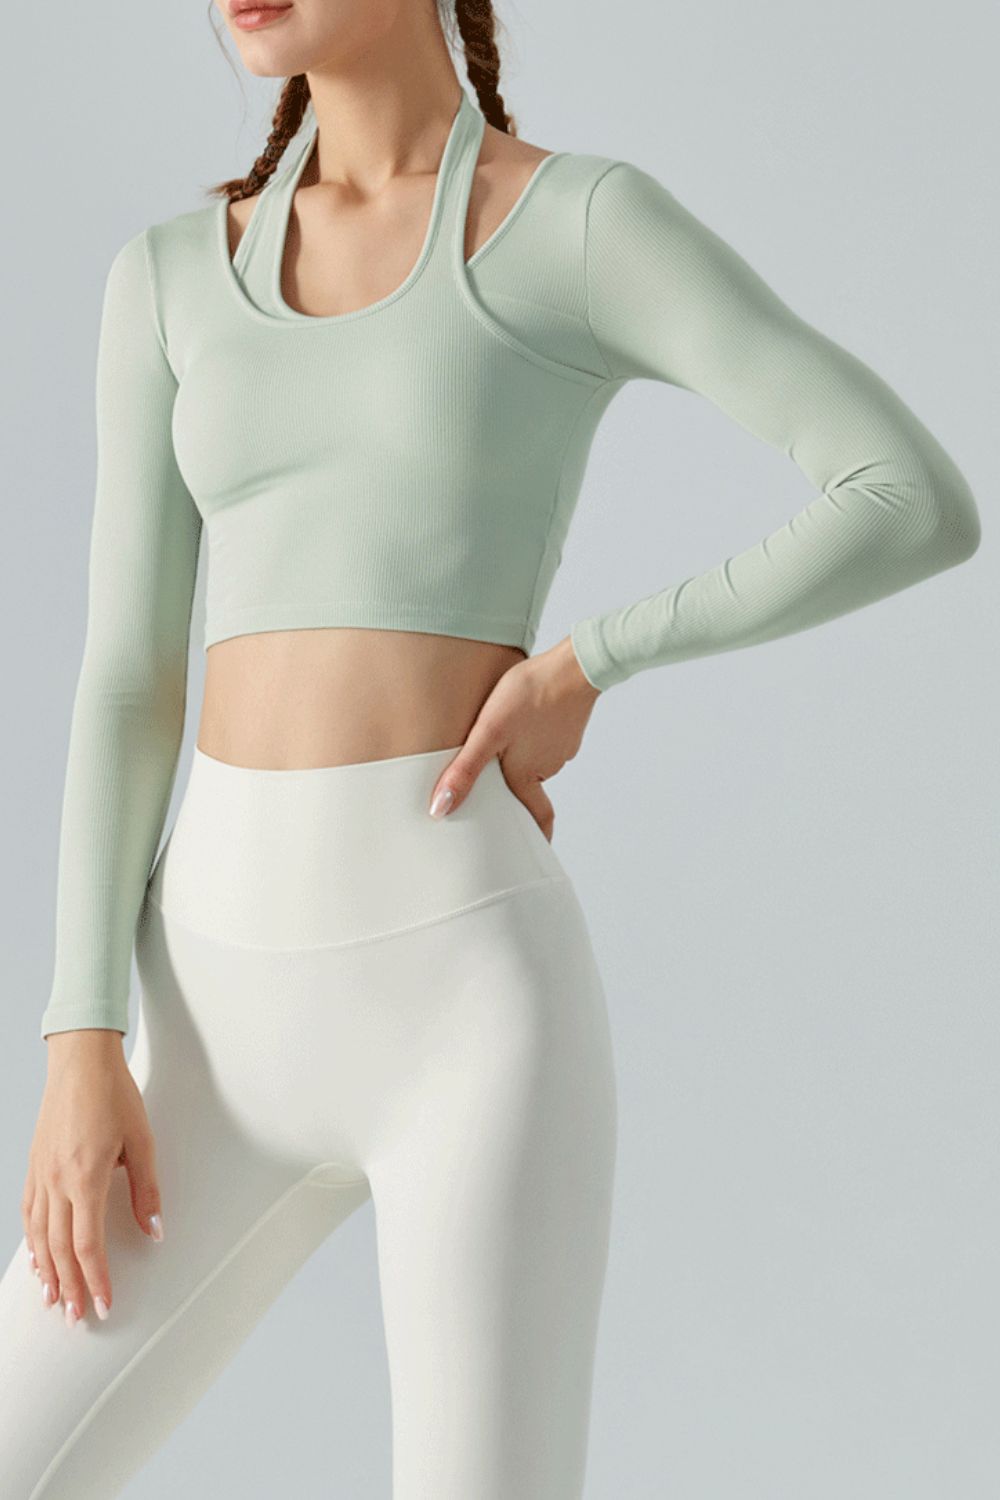 Halter Neck Long Sleeve Cropped Sports Top- stretchy long sleeves